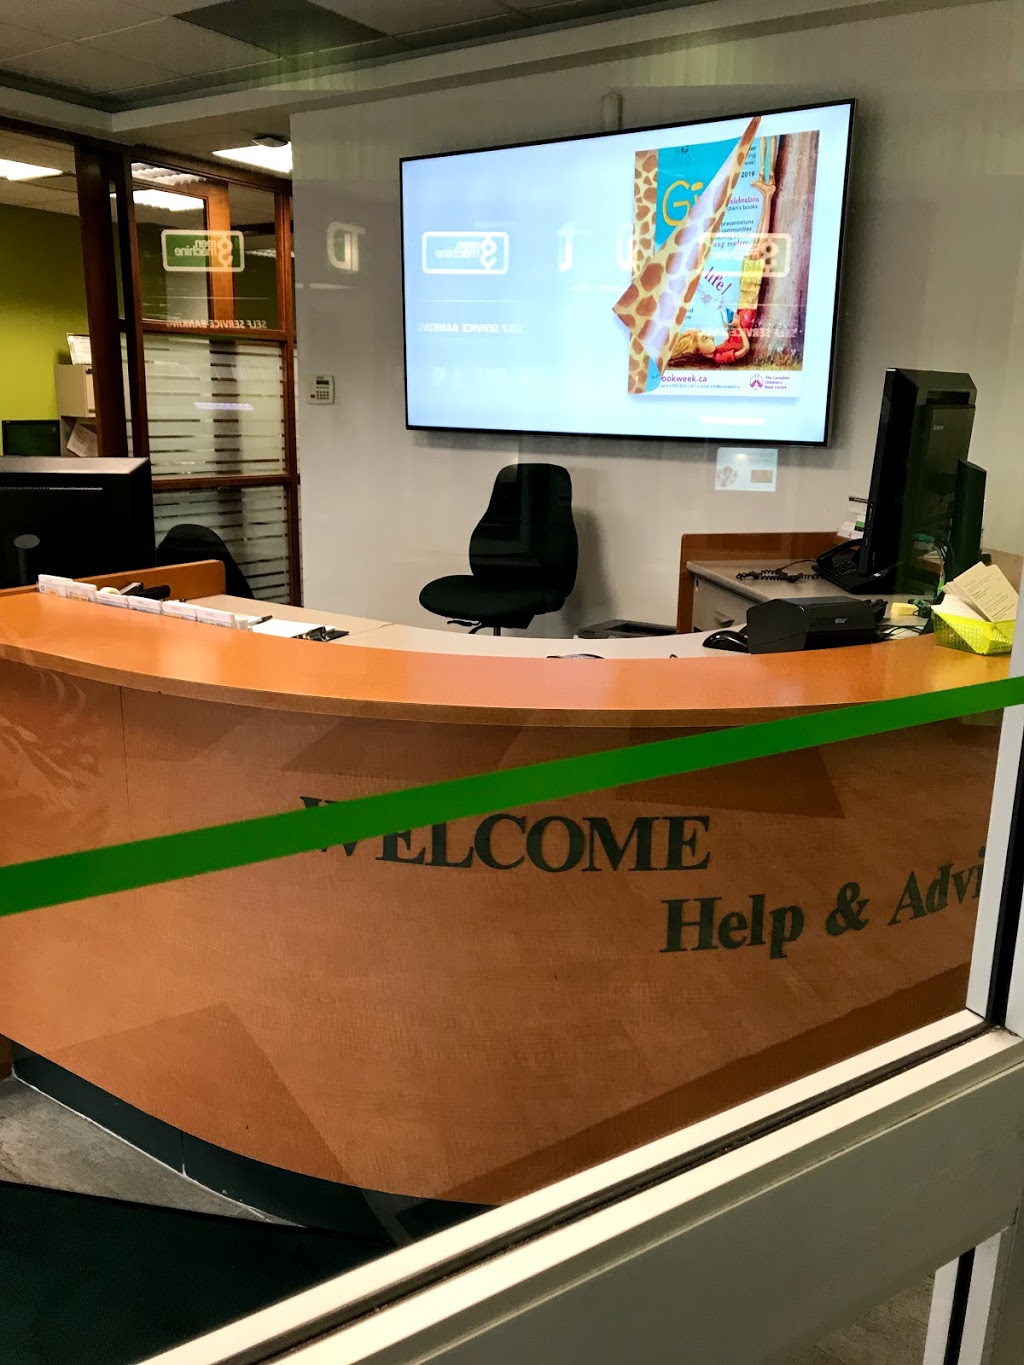 TD Canada Trust Branch and ATM | atm | 4555 Hurontario St U-C10, Mississauga, ON L4Z 3M1, Canada | 9055070870 OR +1 905-507-0870